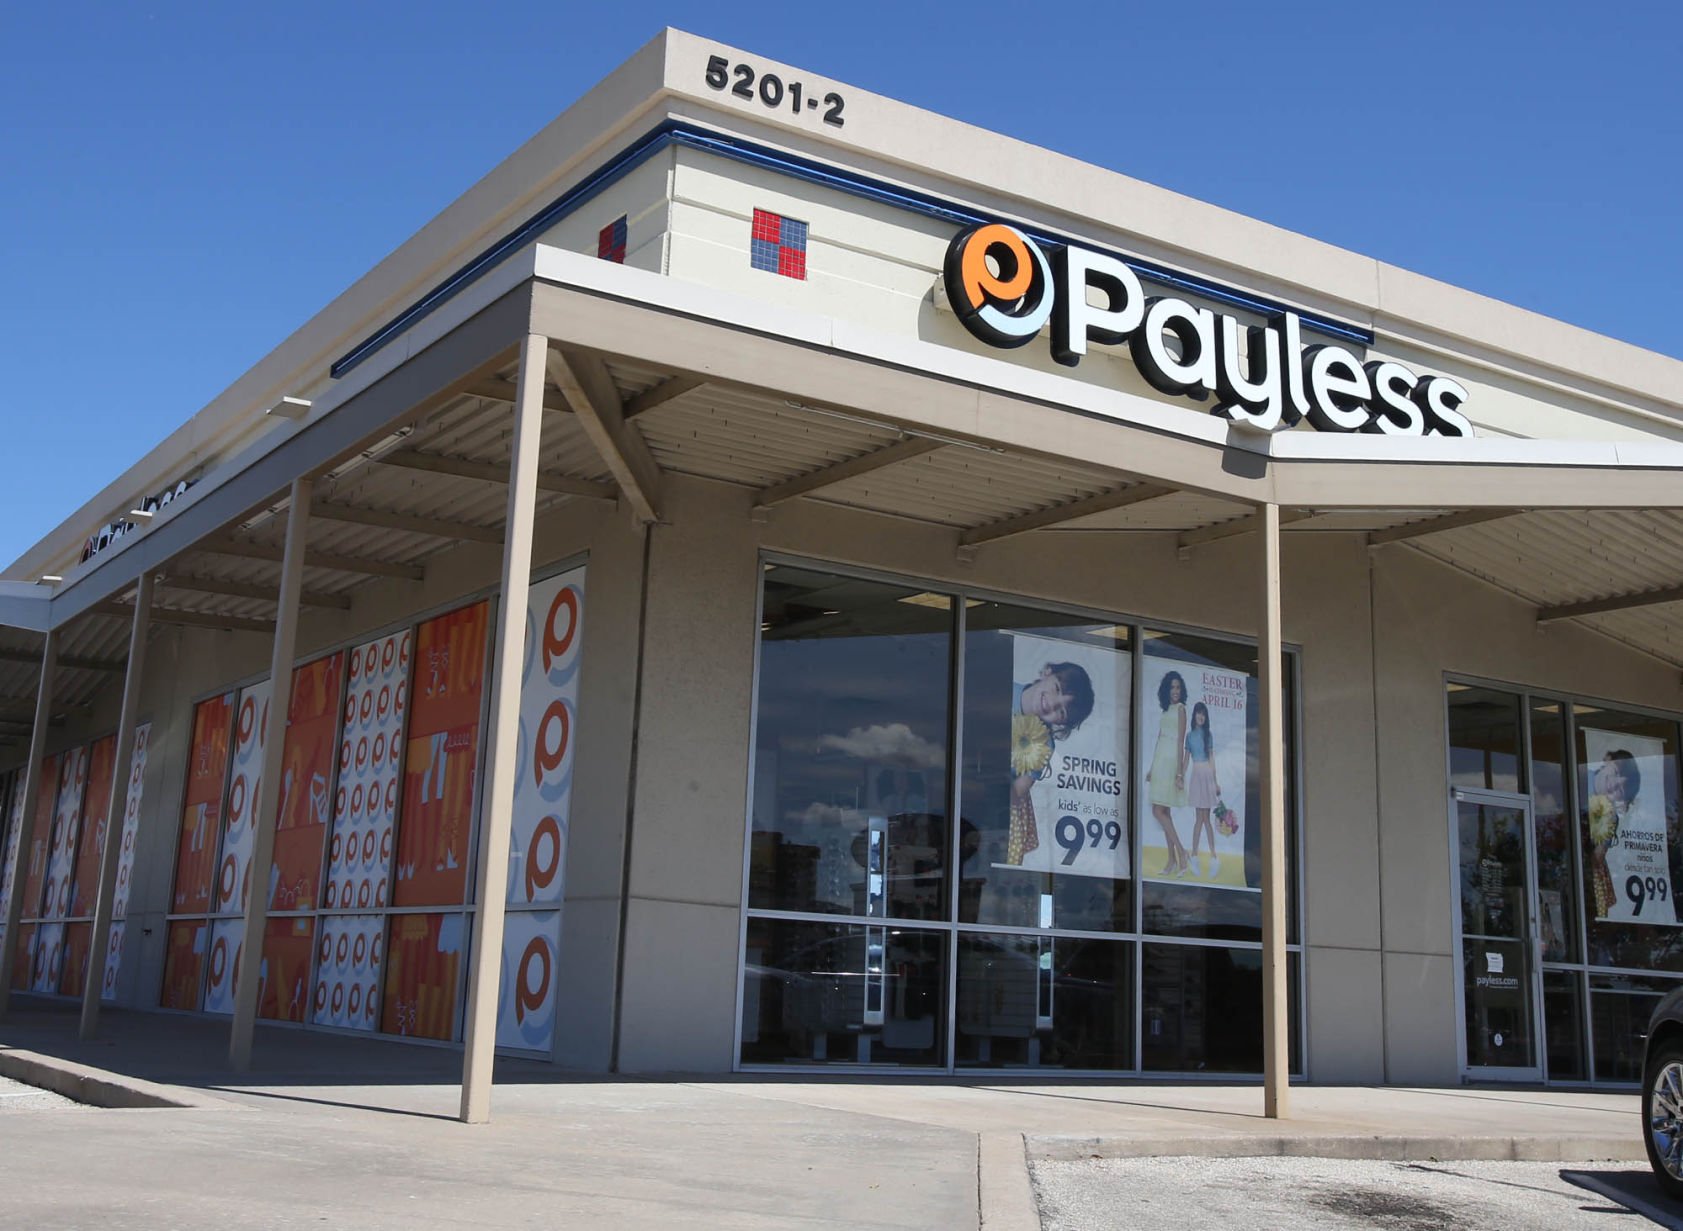 Local Payless ShoeSource store to close 